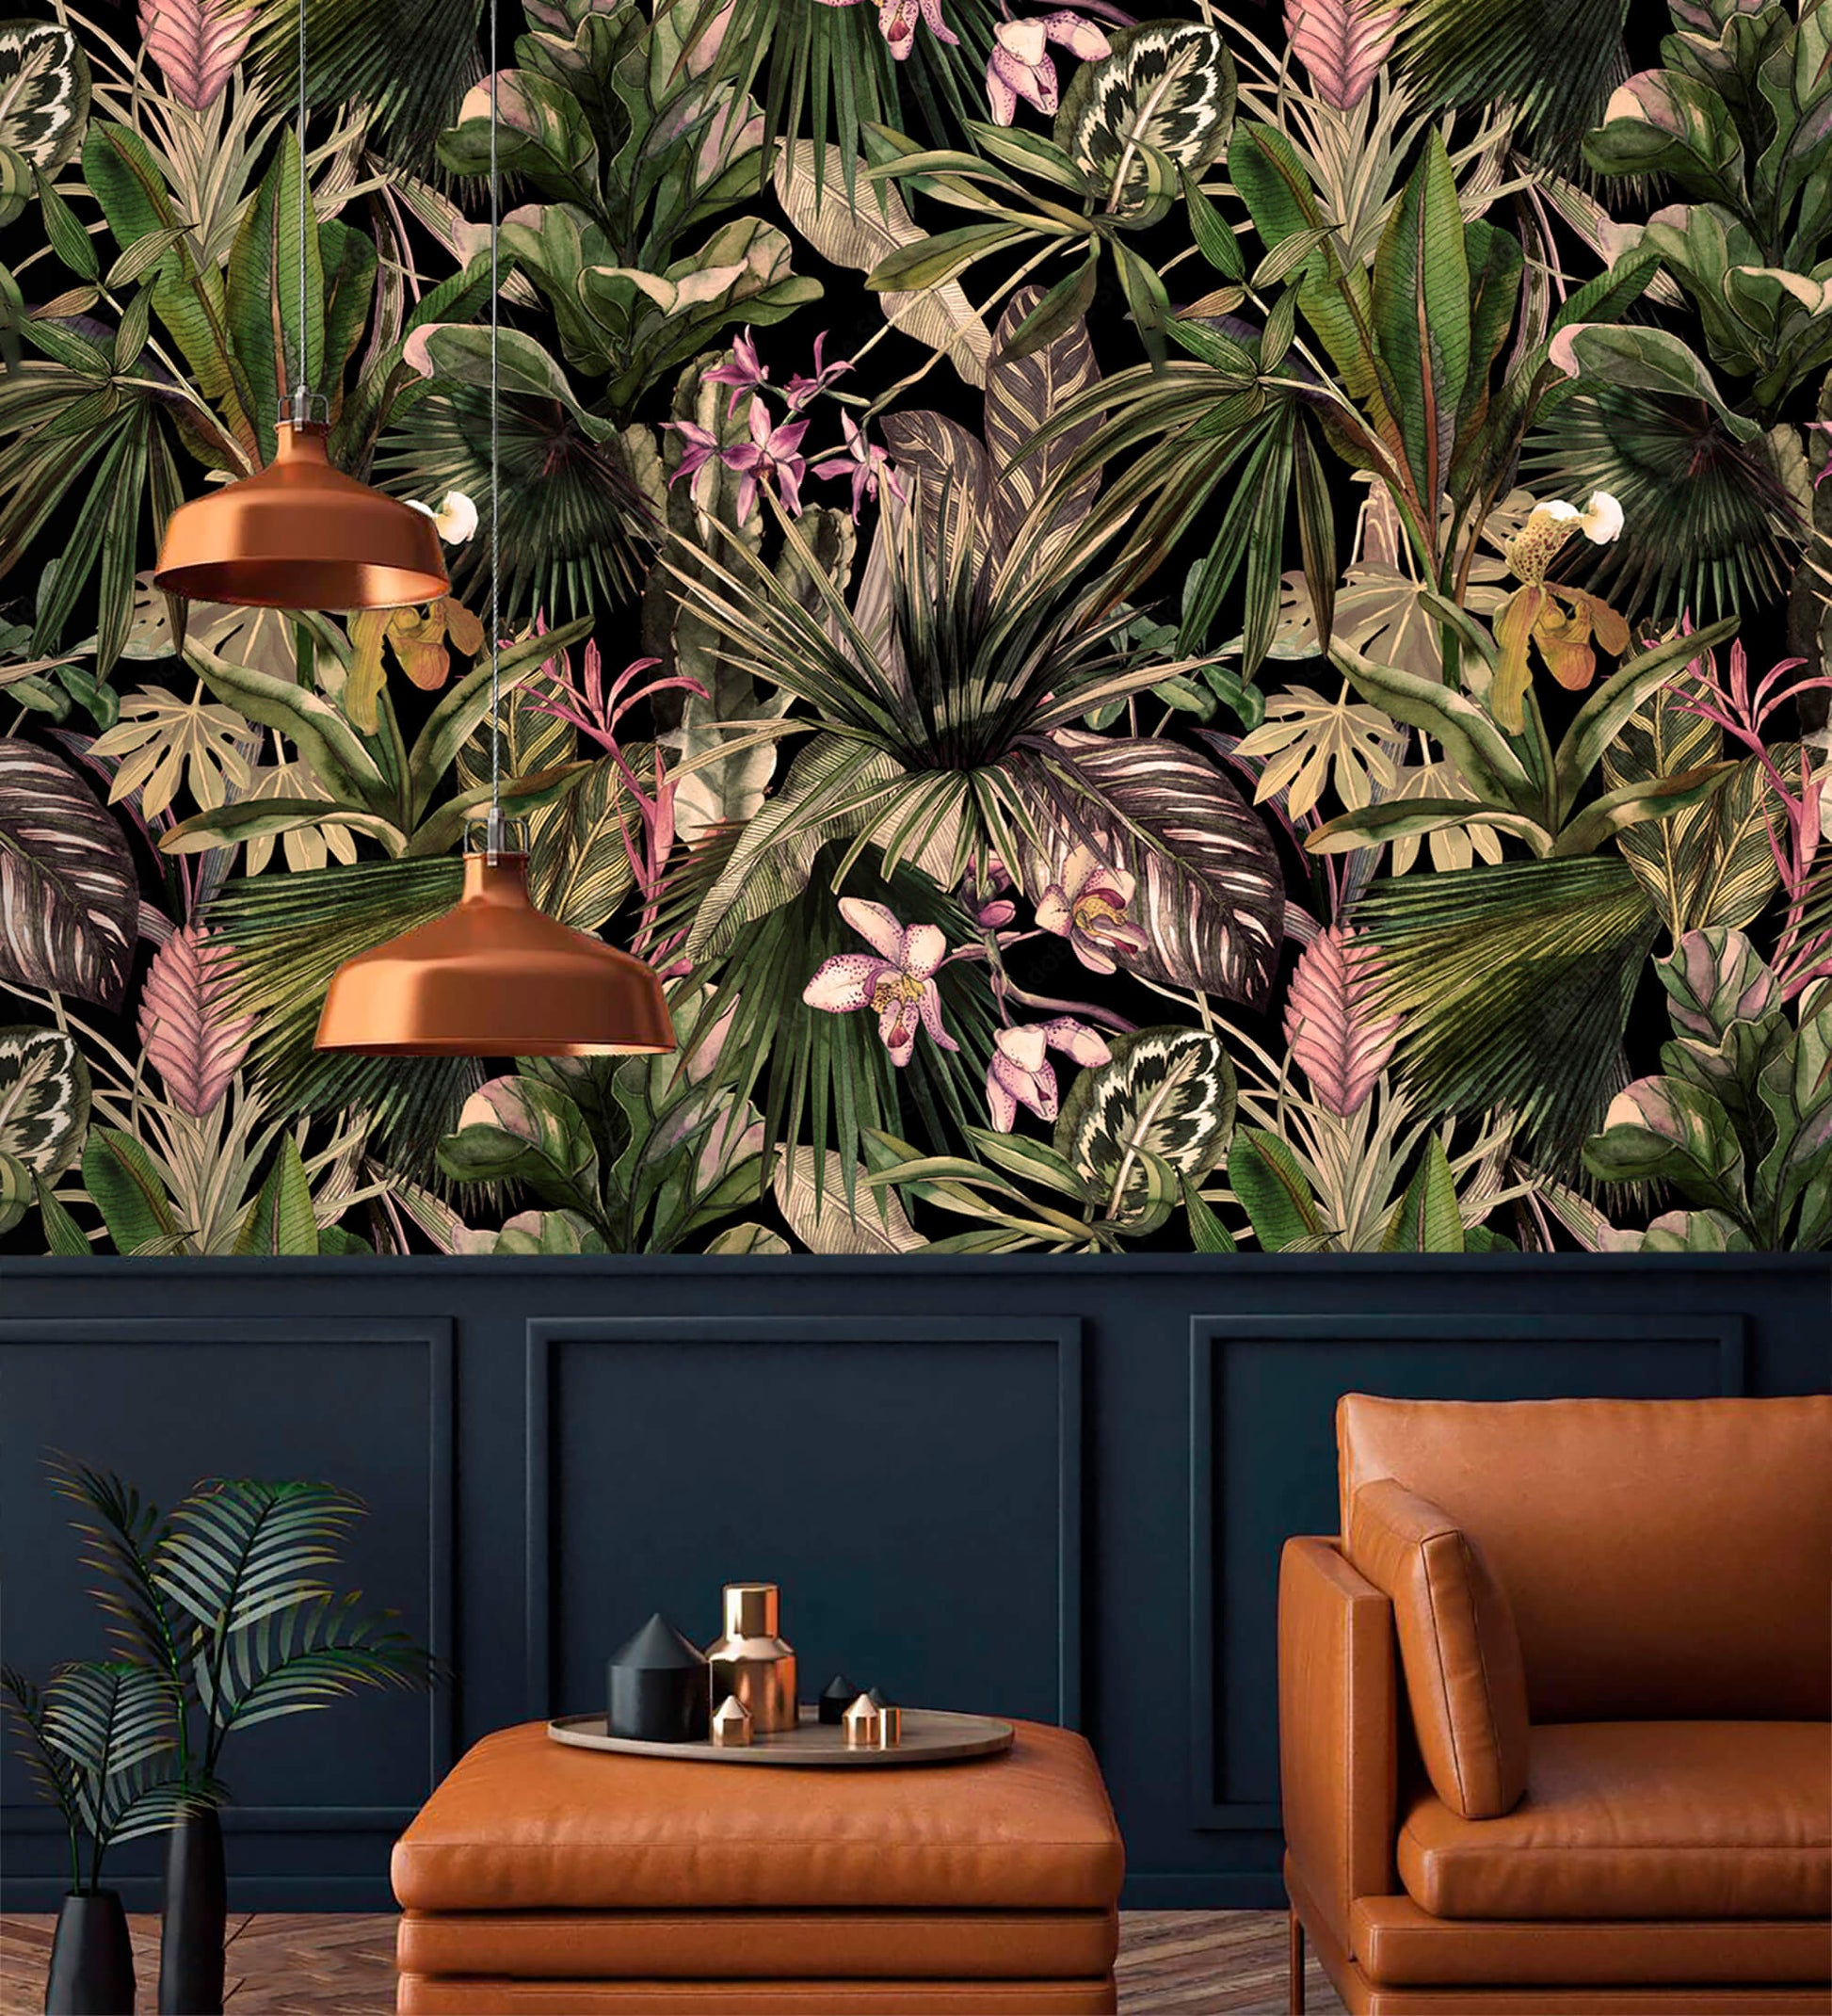 Step into a world of enchantment with the "Jungle Symphony" wallpaper. Vibrant colors and intricate jungle motifs dance across the walls, creating a symphony of nature's beauty. Transform your space into a captivating oasis with this whimsical and vibrant wallpaper design